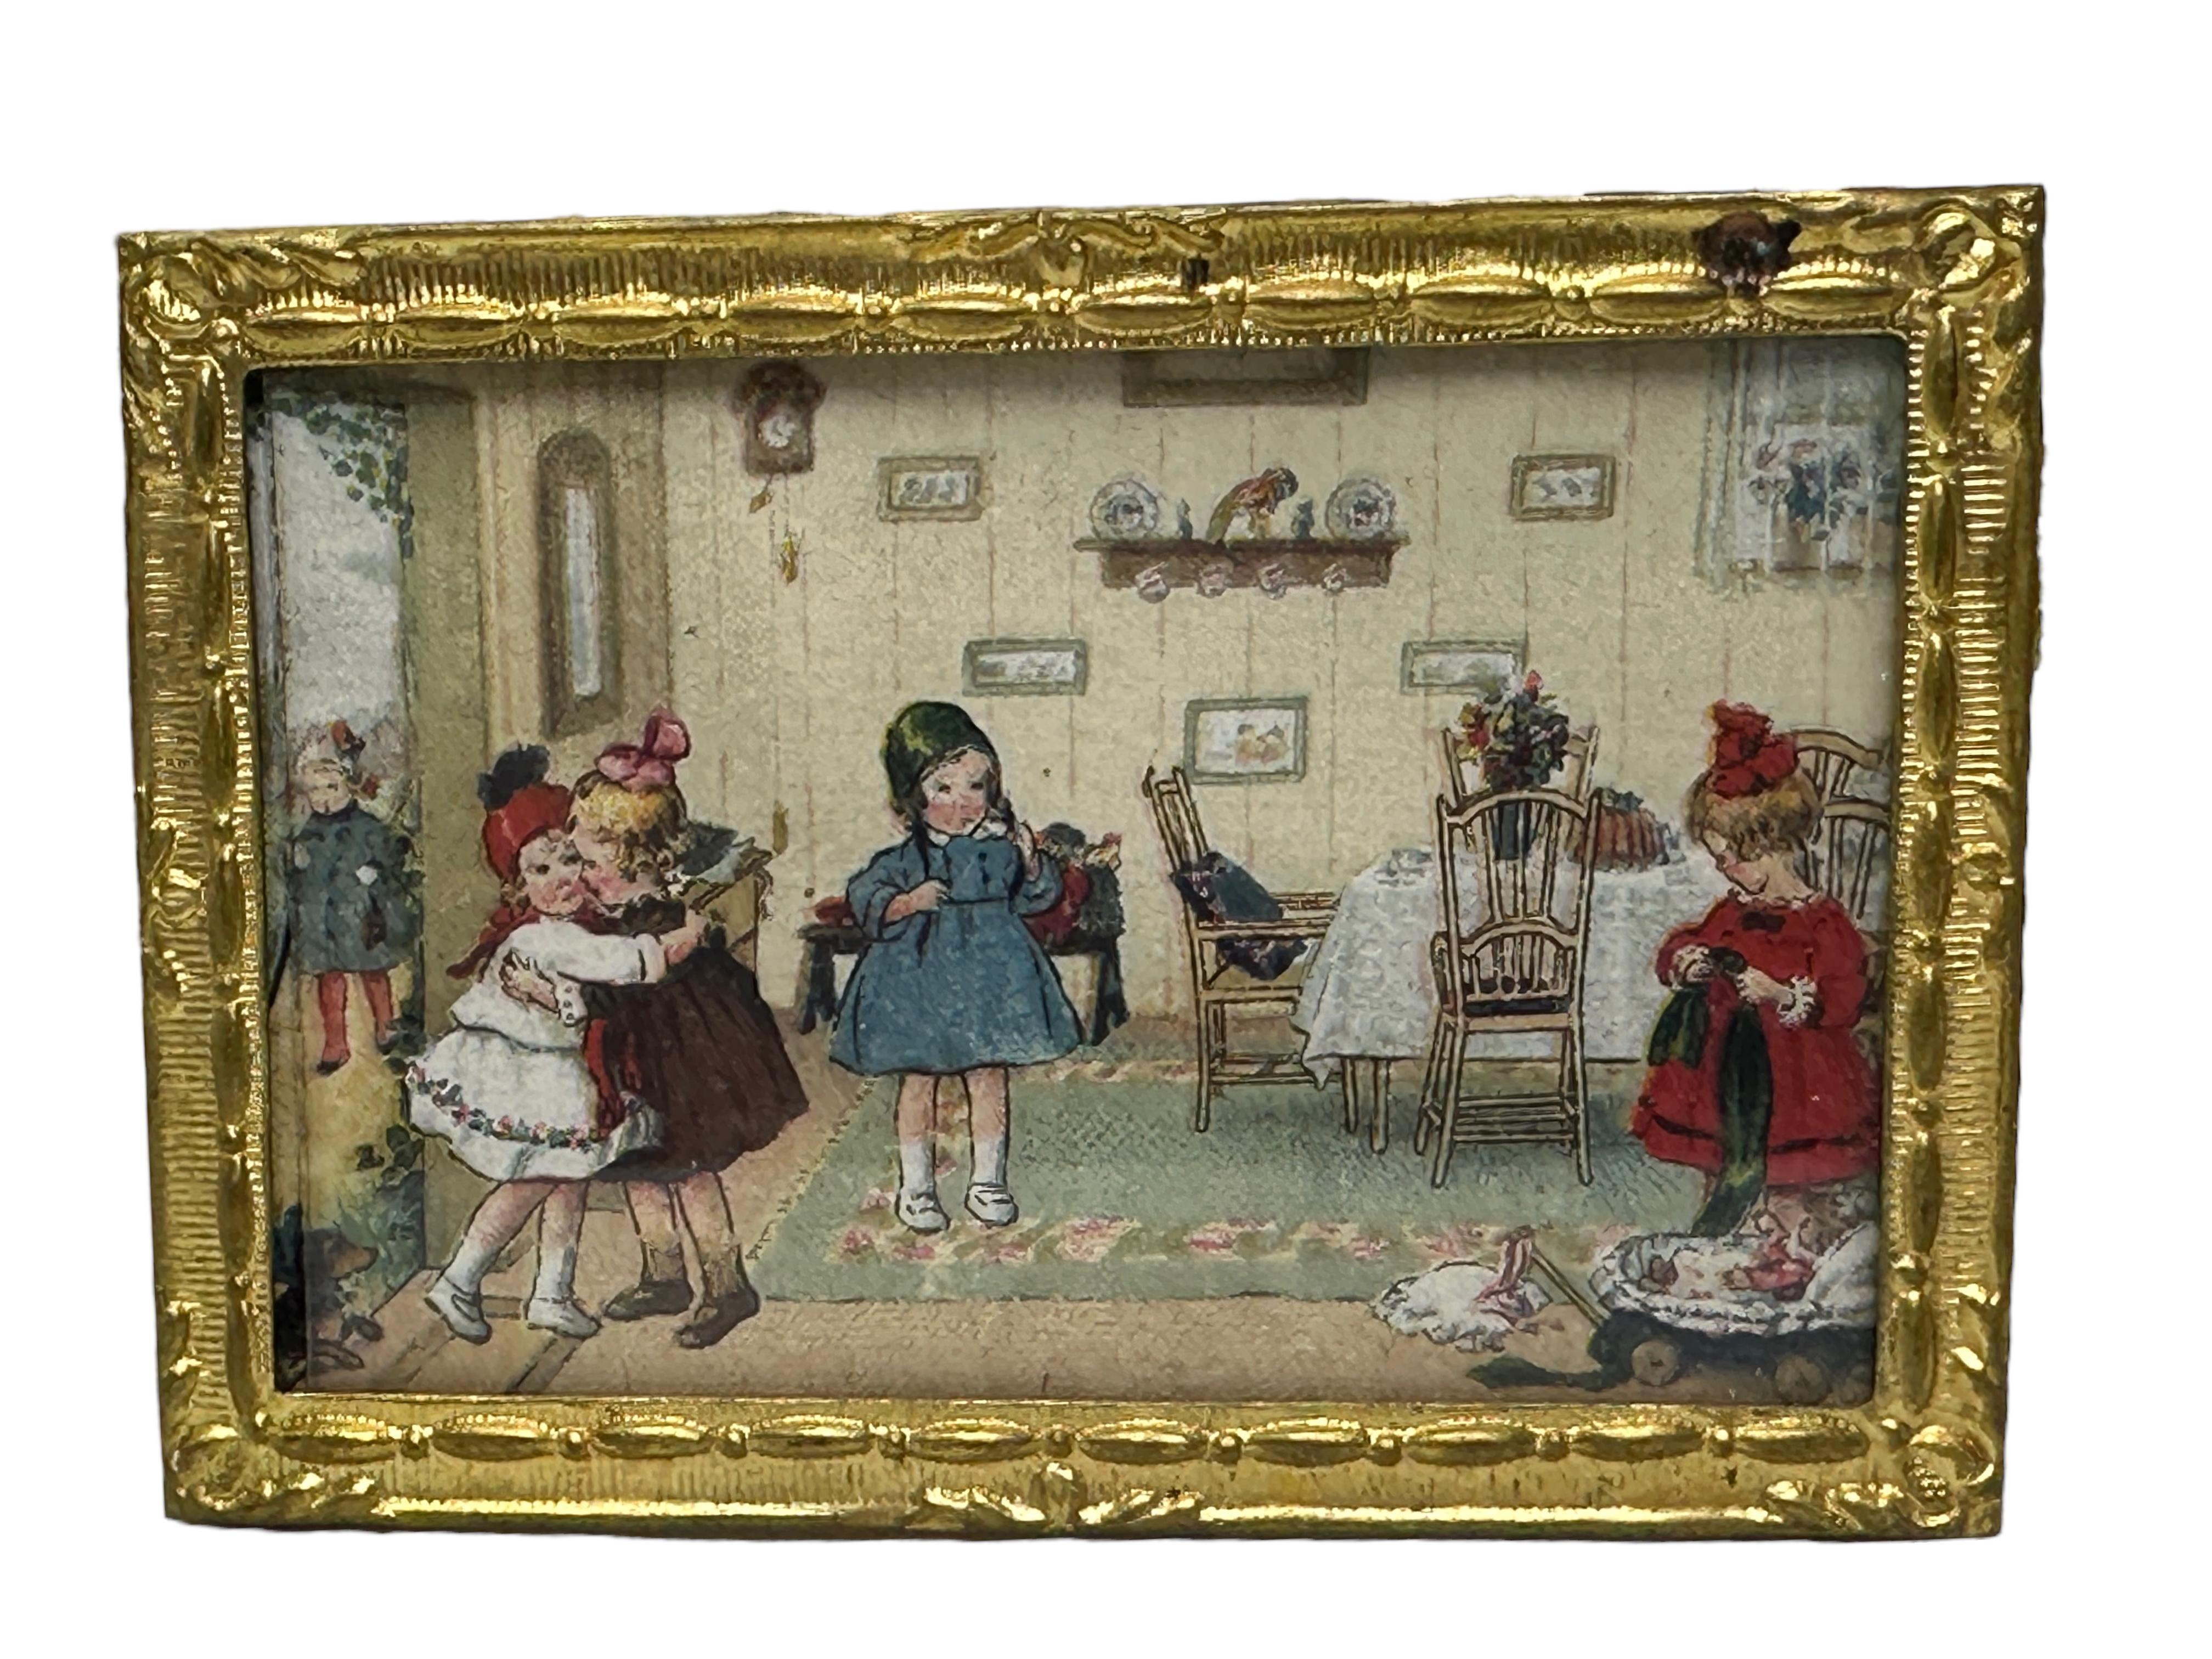 This rare Set of two Pictures framed in Gold plated ormulu frames is a must-have for Dollhouse and Doll collectors and enthusiasts alike. With its beautiful intricate design, it is suitable for any room and adds a touch of elegance to your